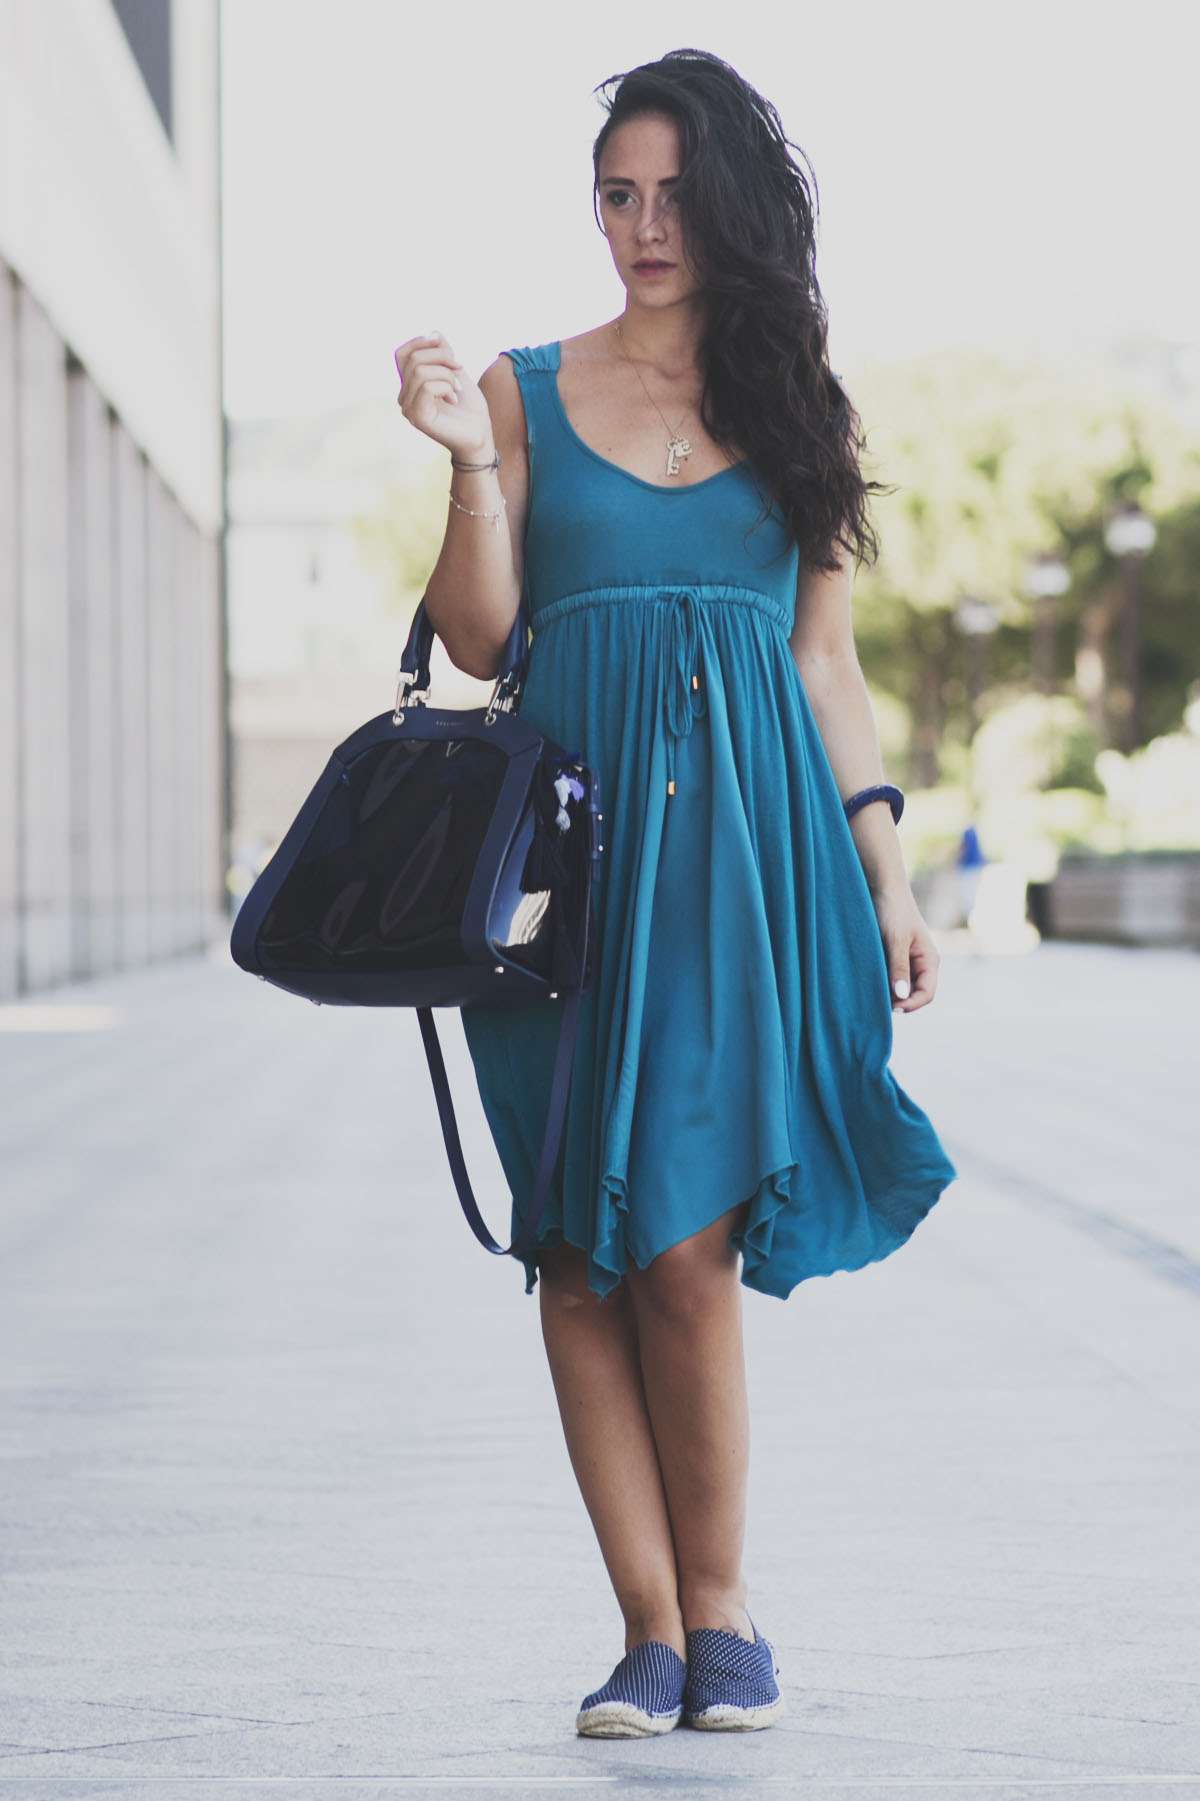 teal and sea blue outfit